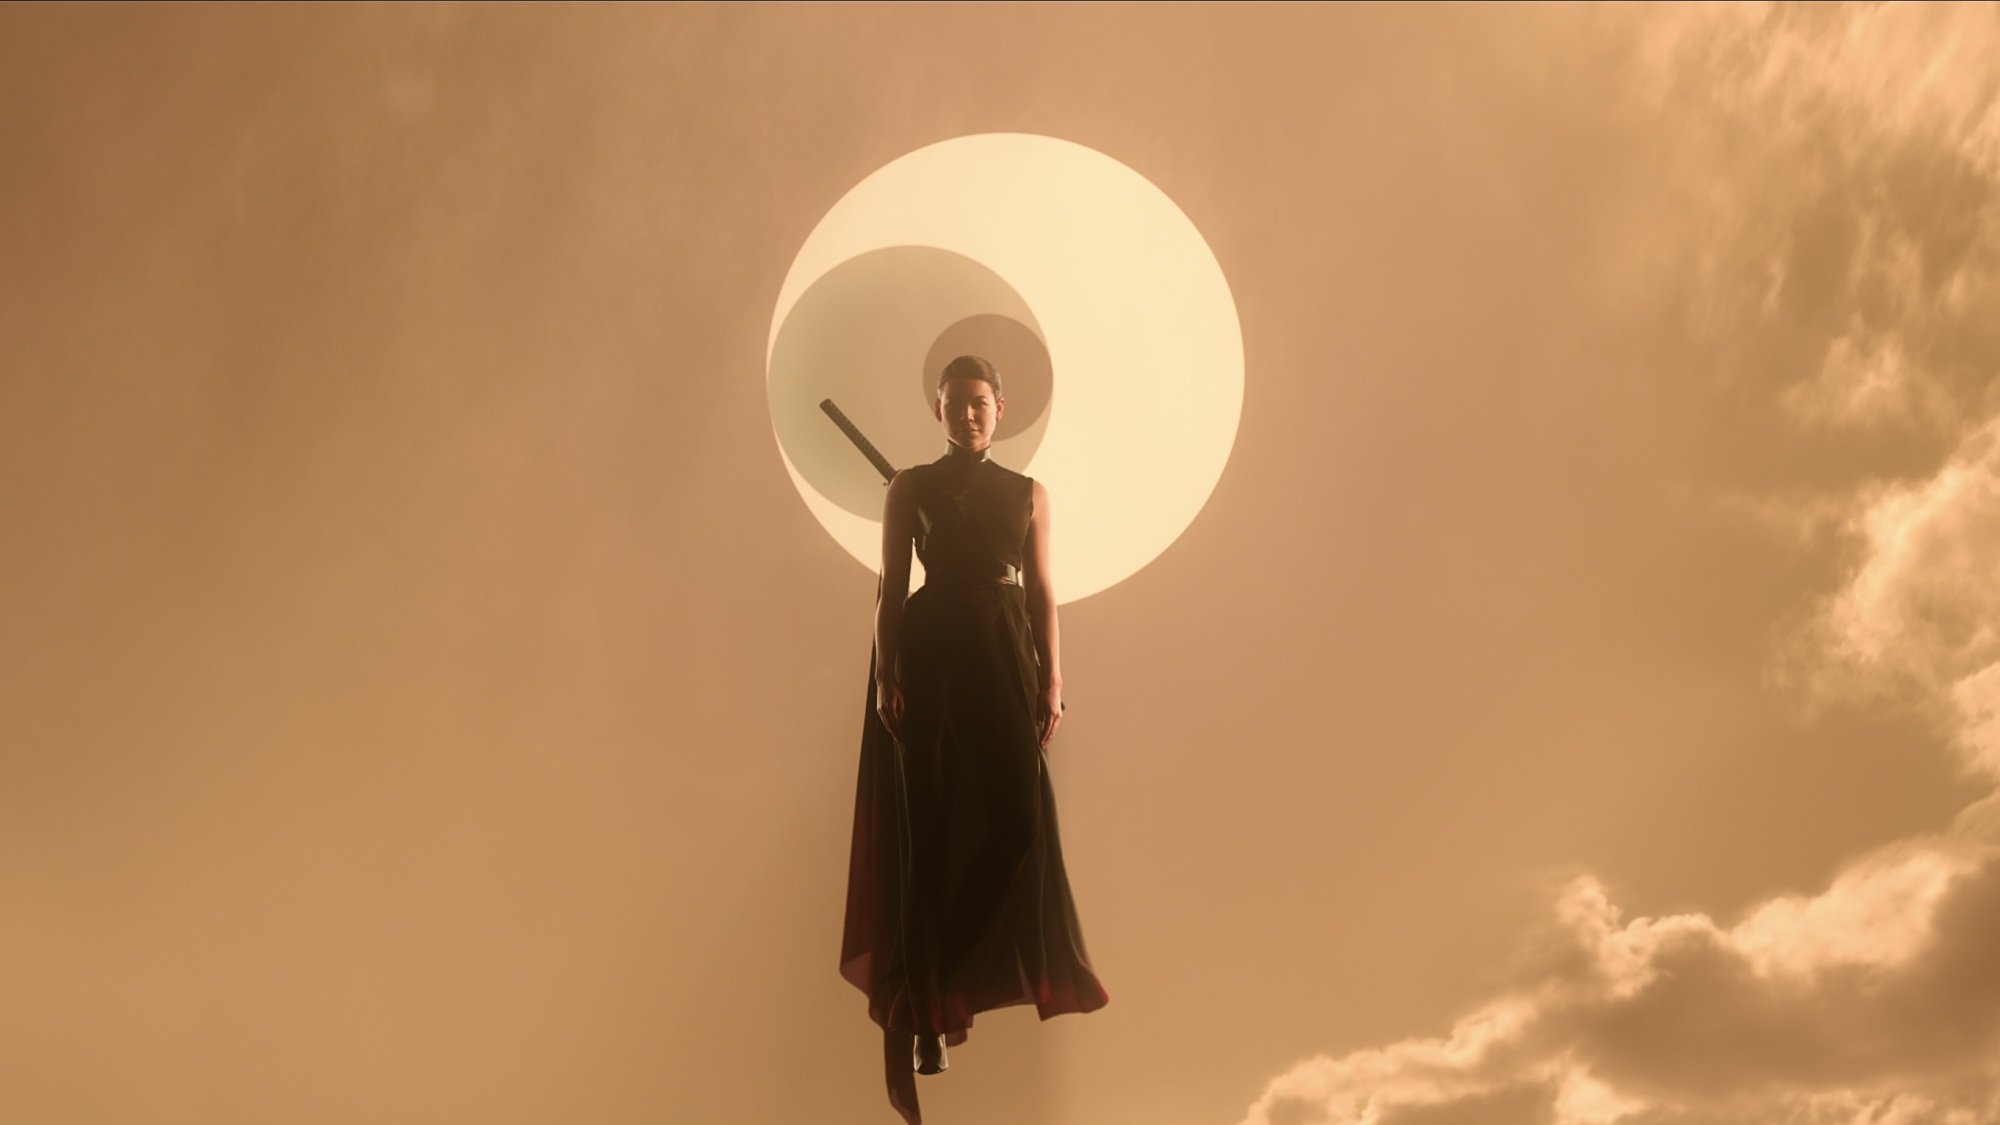 A woman with a sword strapped to her back floats through an orange sky against a symbol of three interlocking symbols.